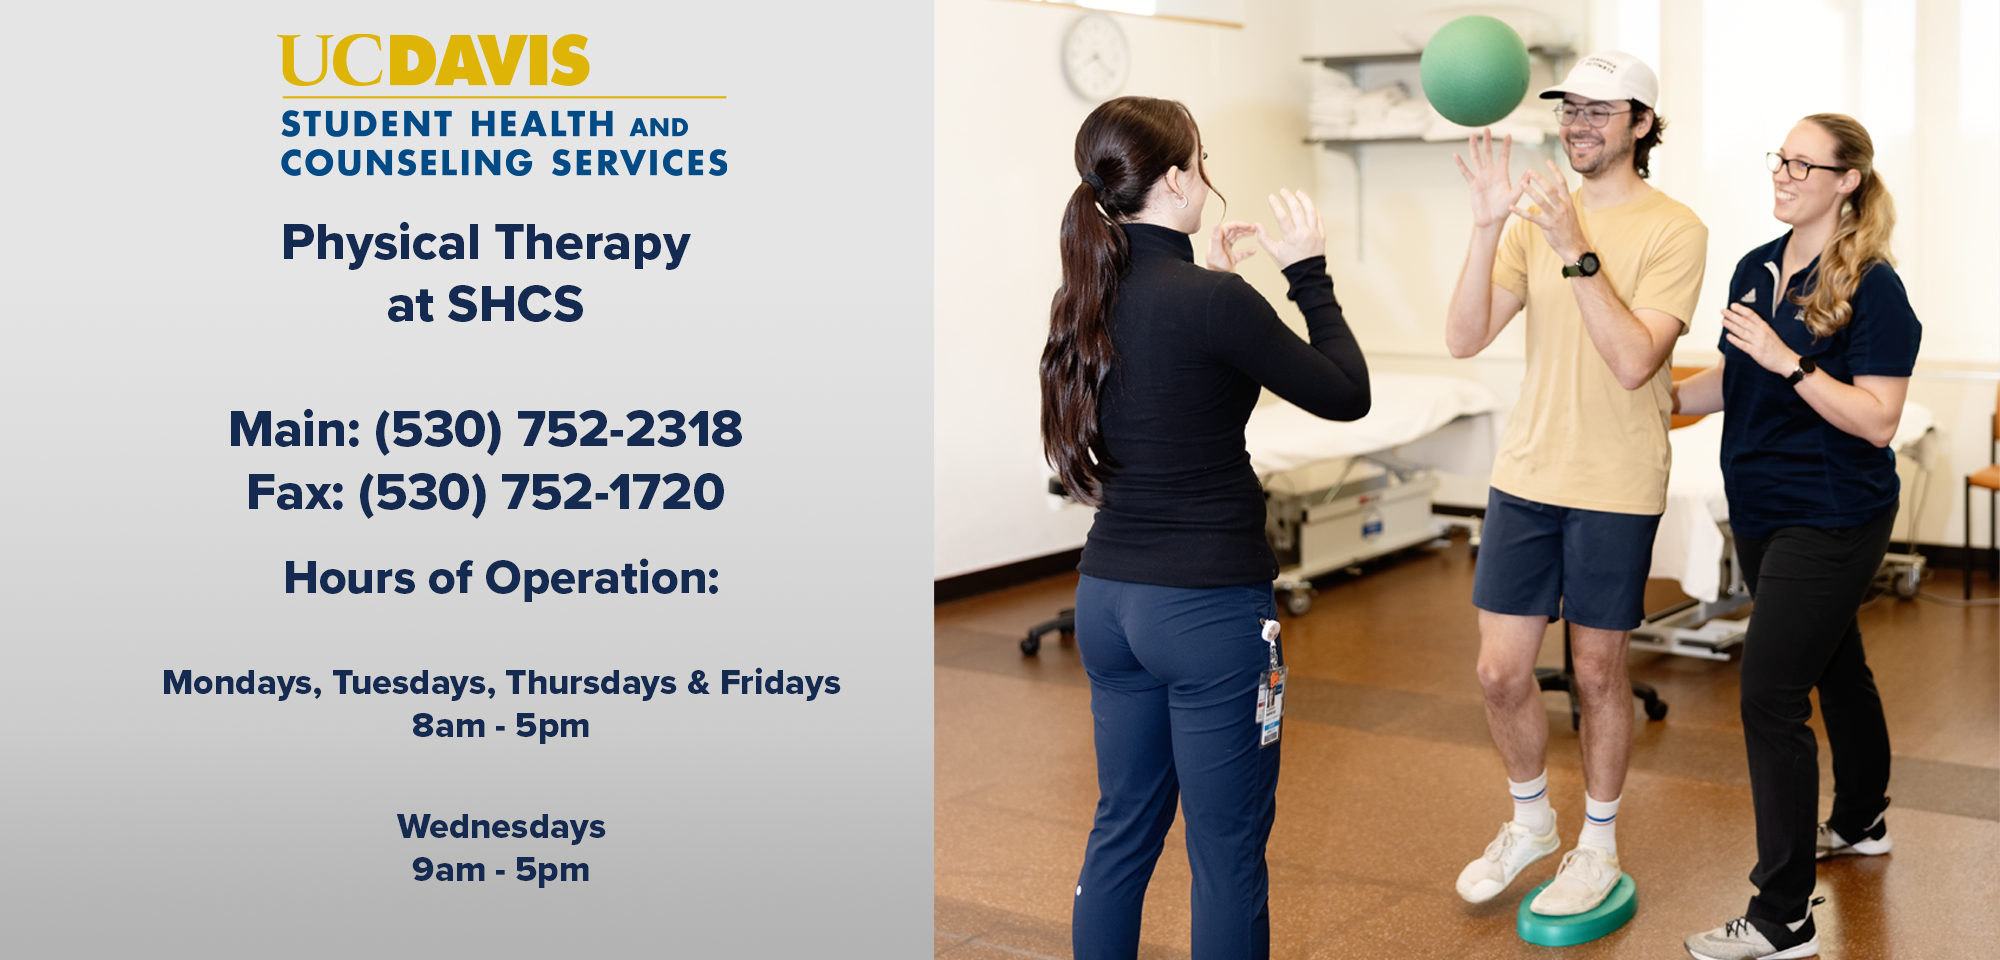 Physical Therapy - Call (530) 752-2318 to schedule an appointment.